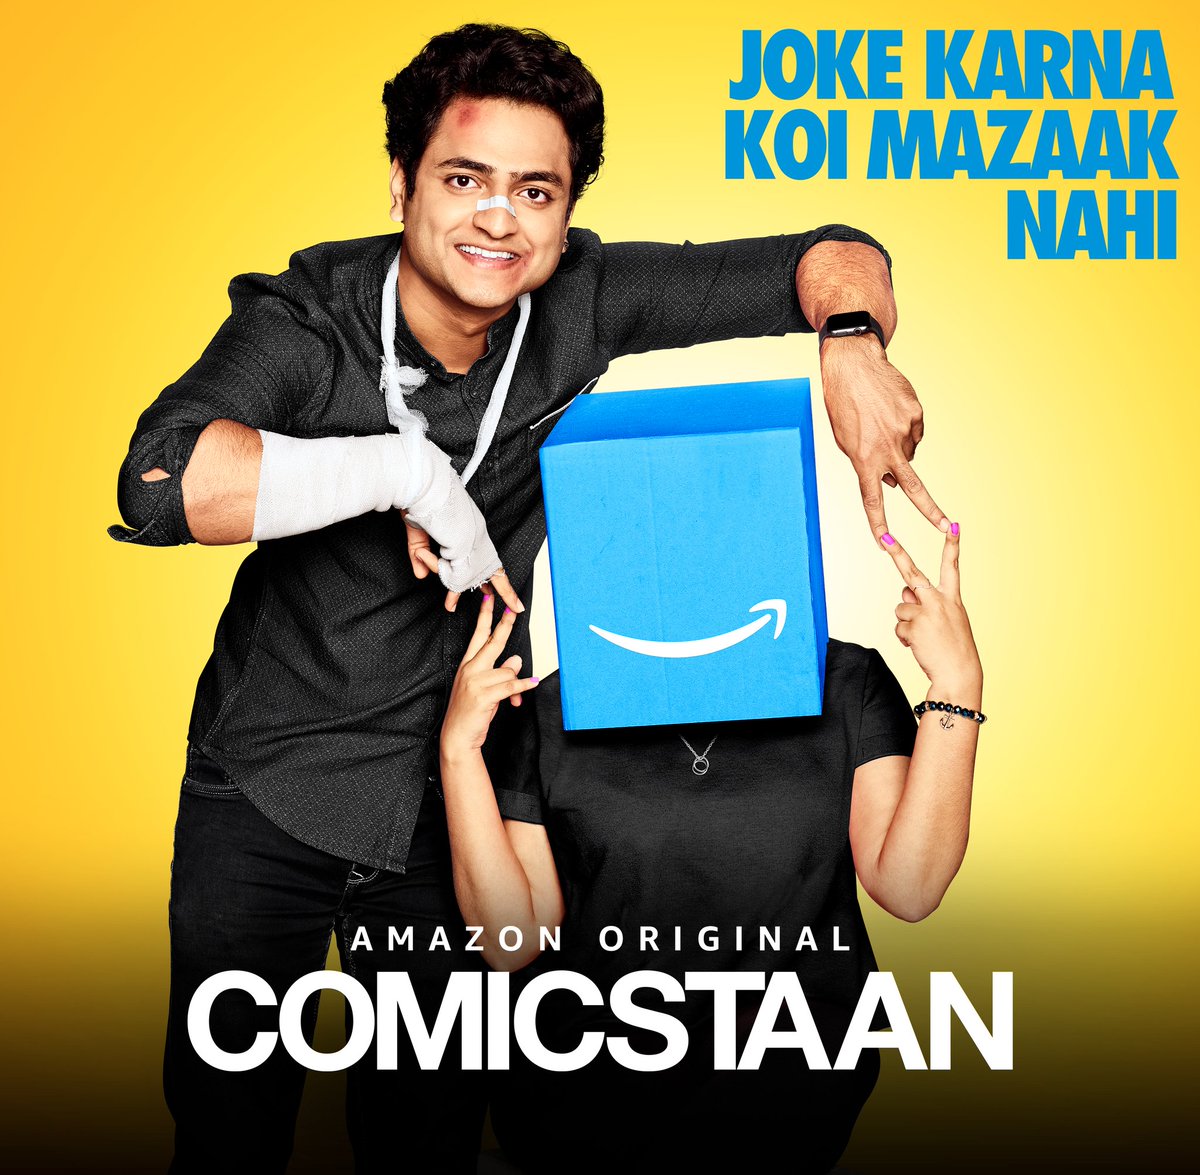 Brace yourselves (pun intended). #Comicstaan2